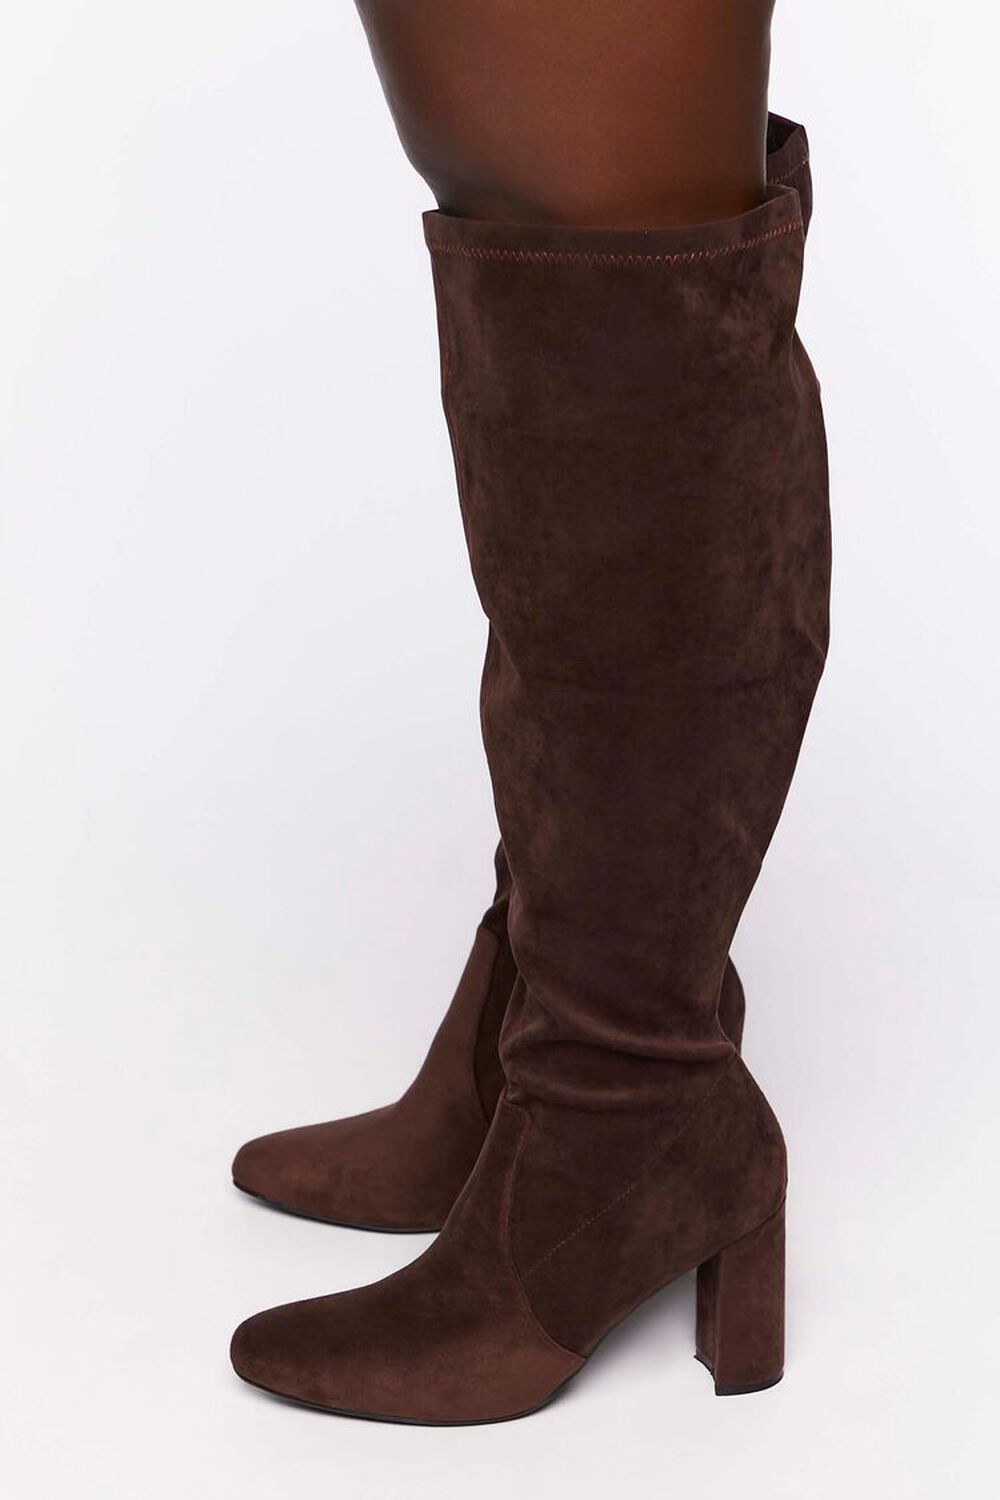 BROWN Faux Suede Over-the-Knee Boots (Wide), image 2